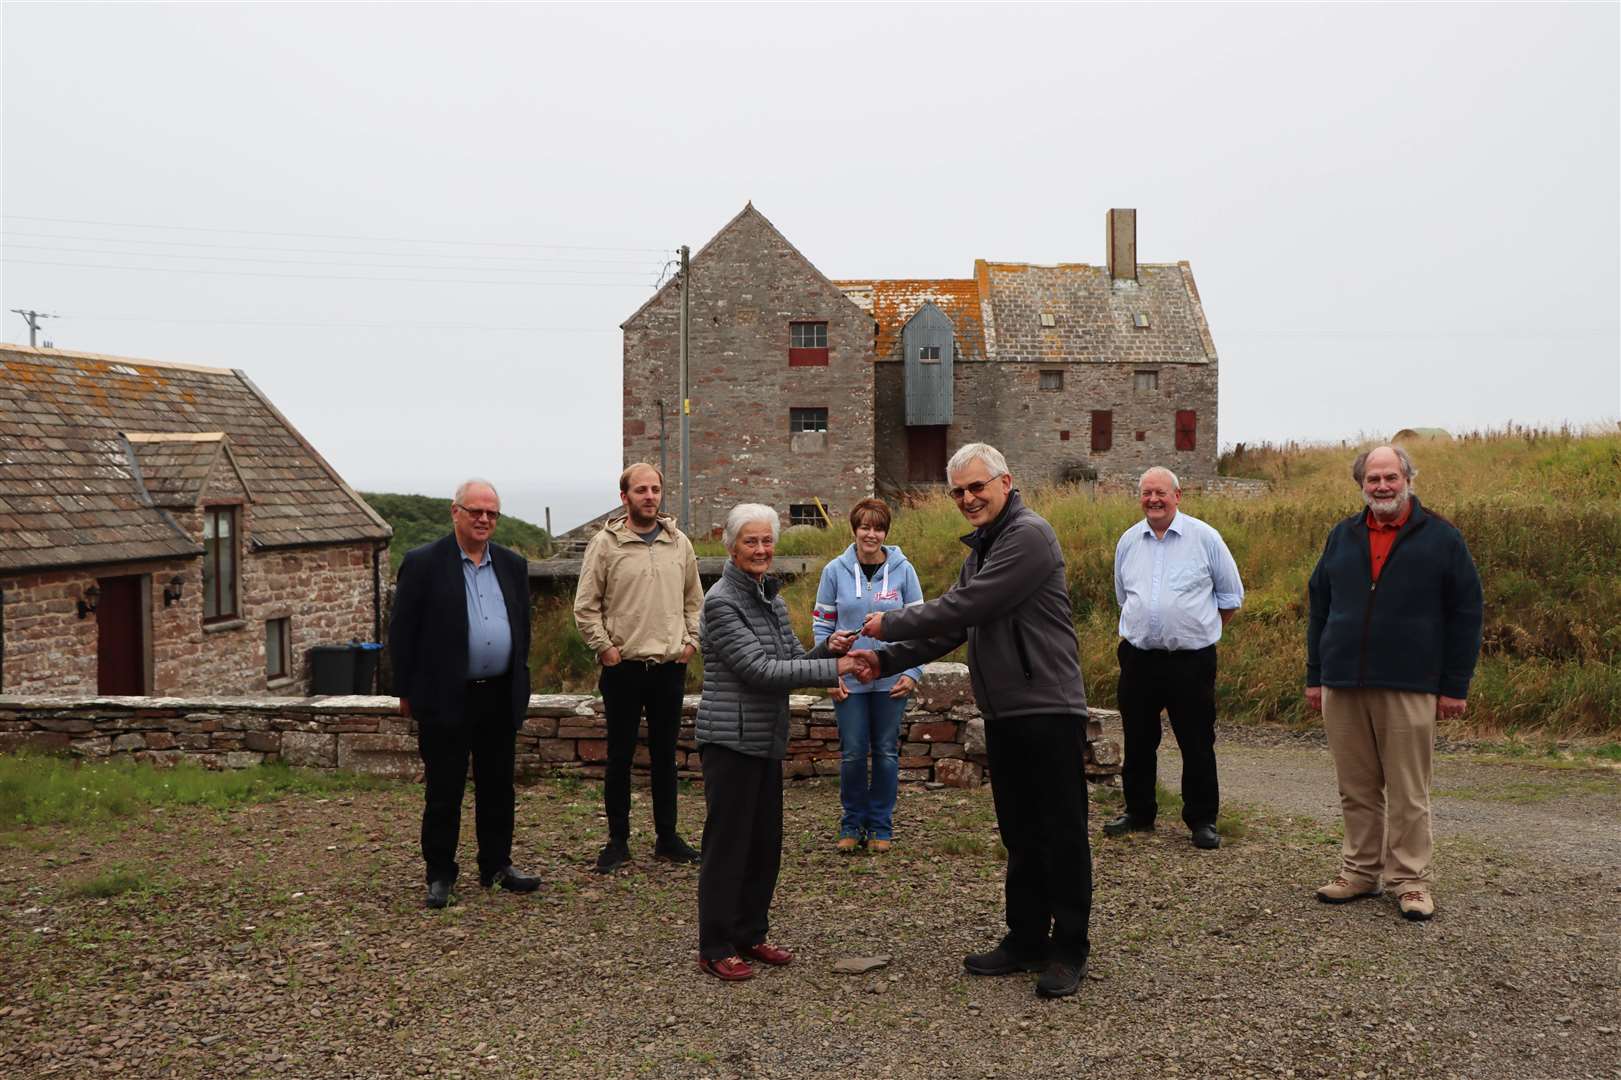 Sina Houston handing the keys to Rognvald Brown, chairman of the John O'Groats Mill Trust, with some of the trust board members looking on – (from left) Ian Leith, Darren Coghill, Fiona Harper, Walter Mowat and Lyall Rennie.